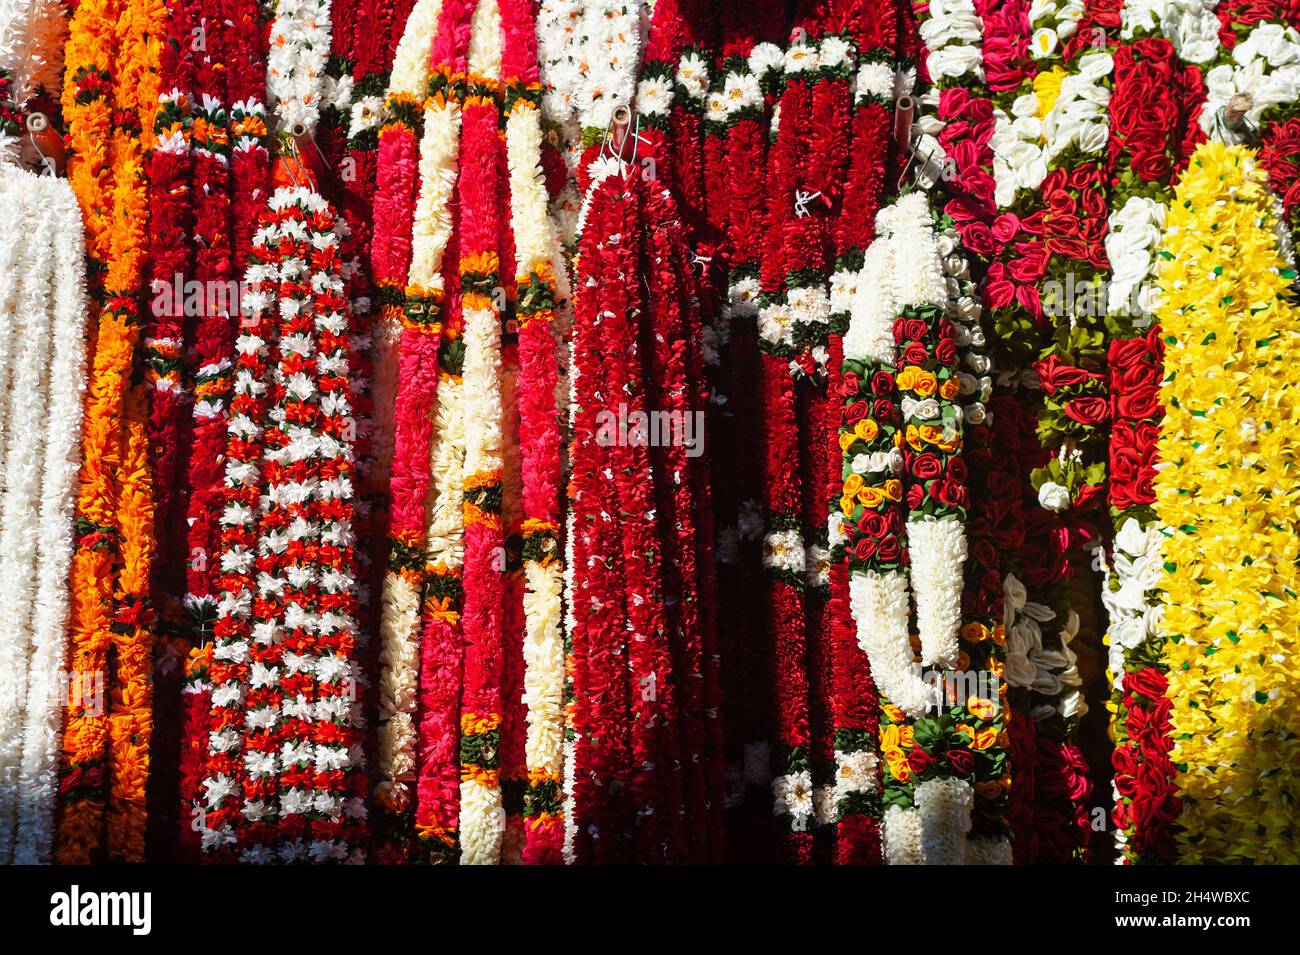 27.10.2021, Singapore, Republic of Singapore, Asia - Decorative ornaments and colourful flower garlands are displayed for sale in Little India. Stock Photo